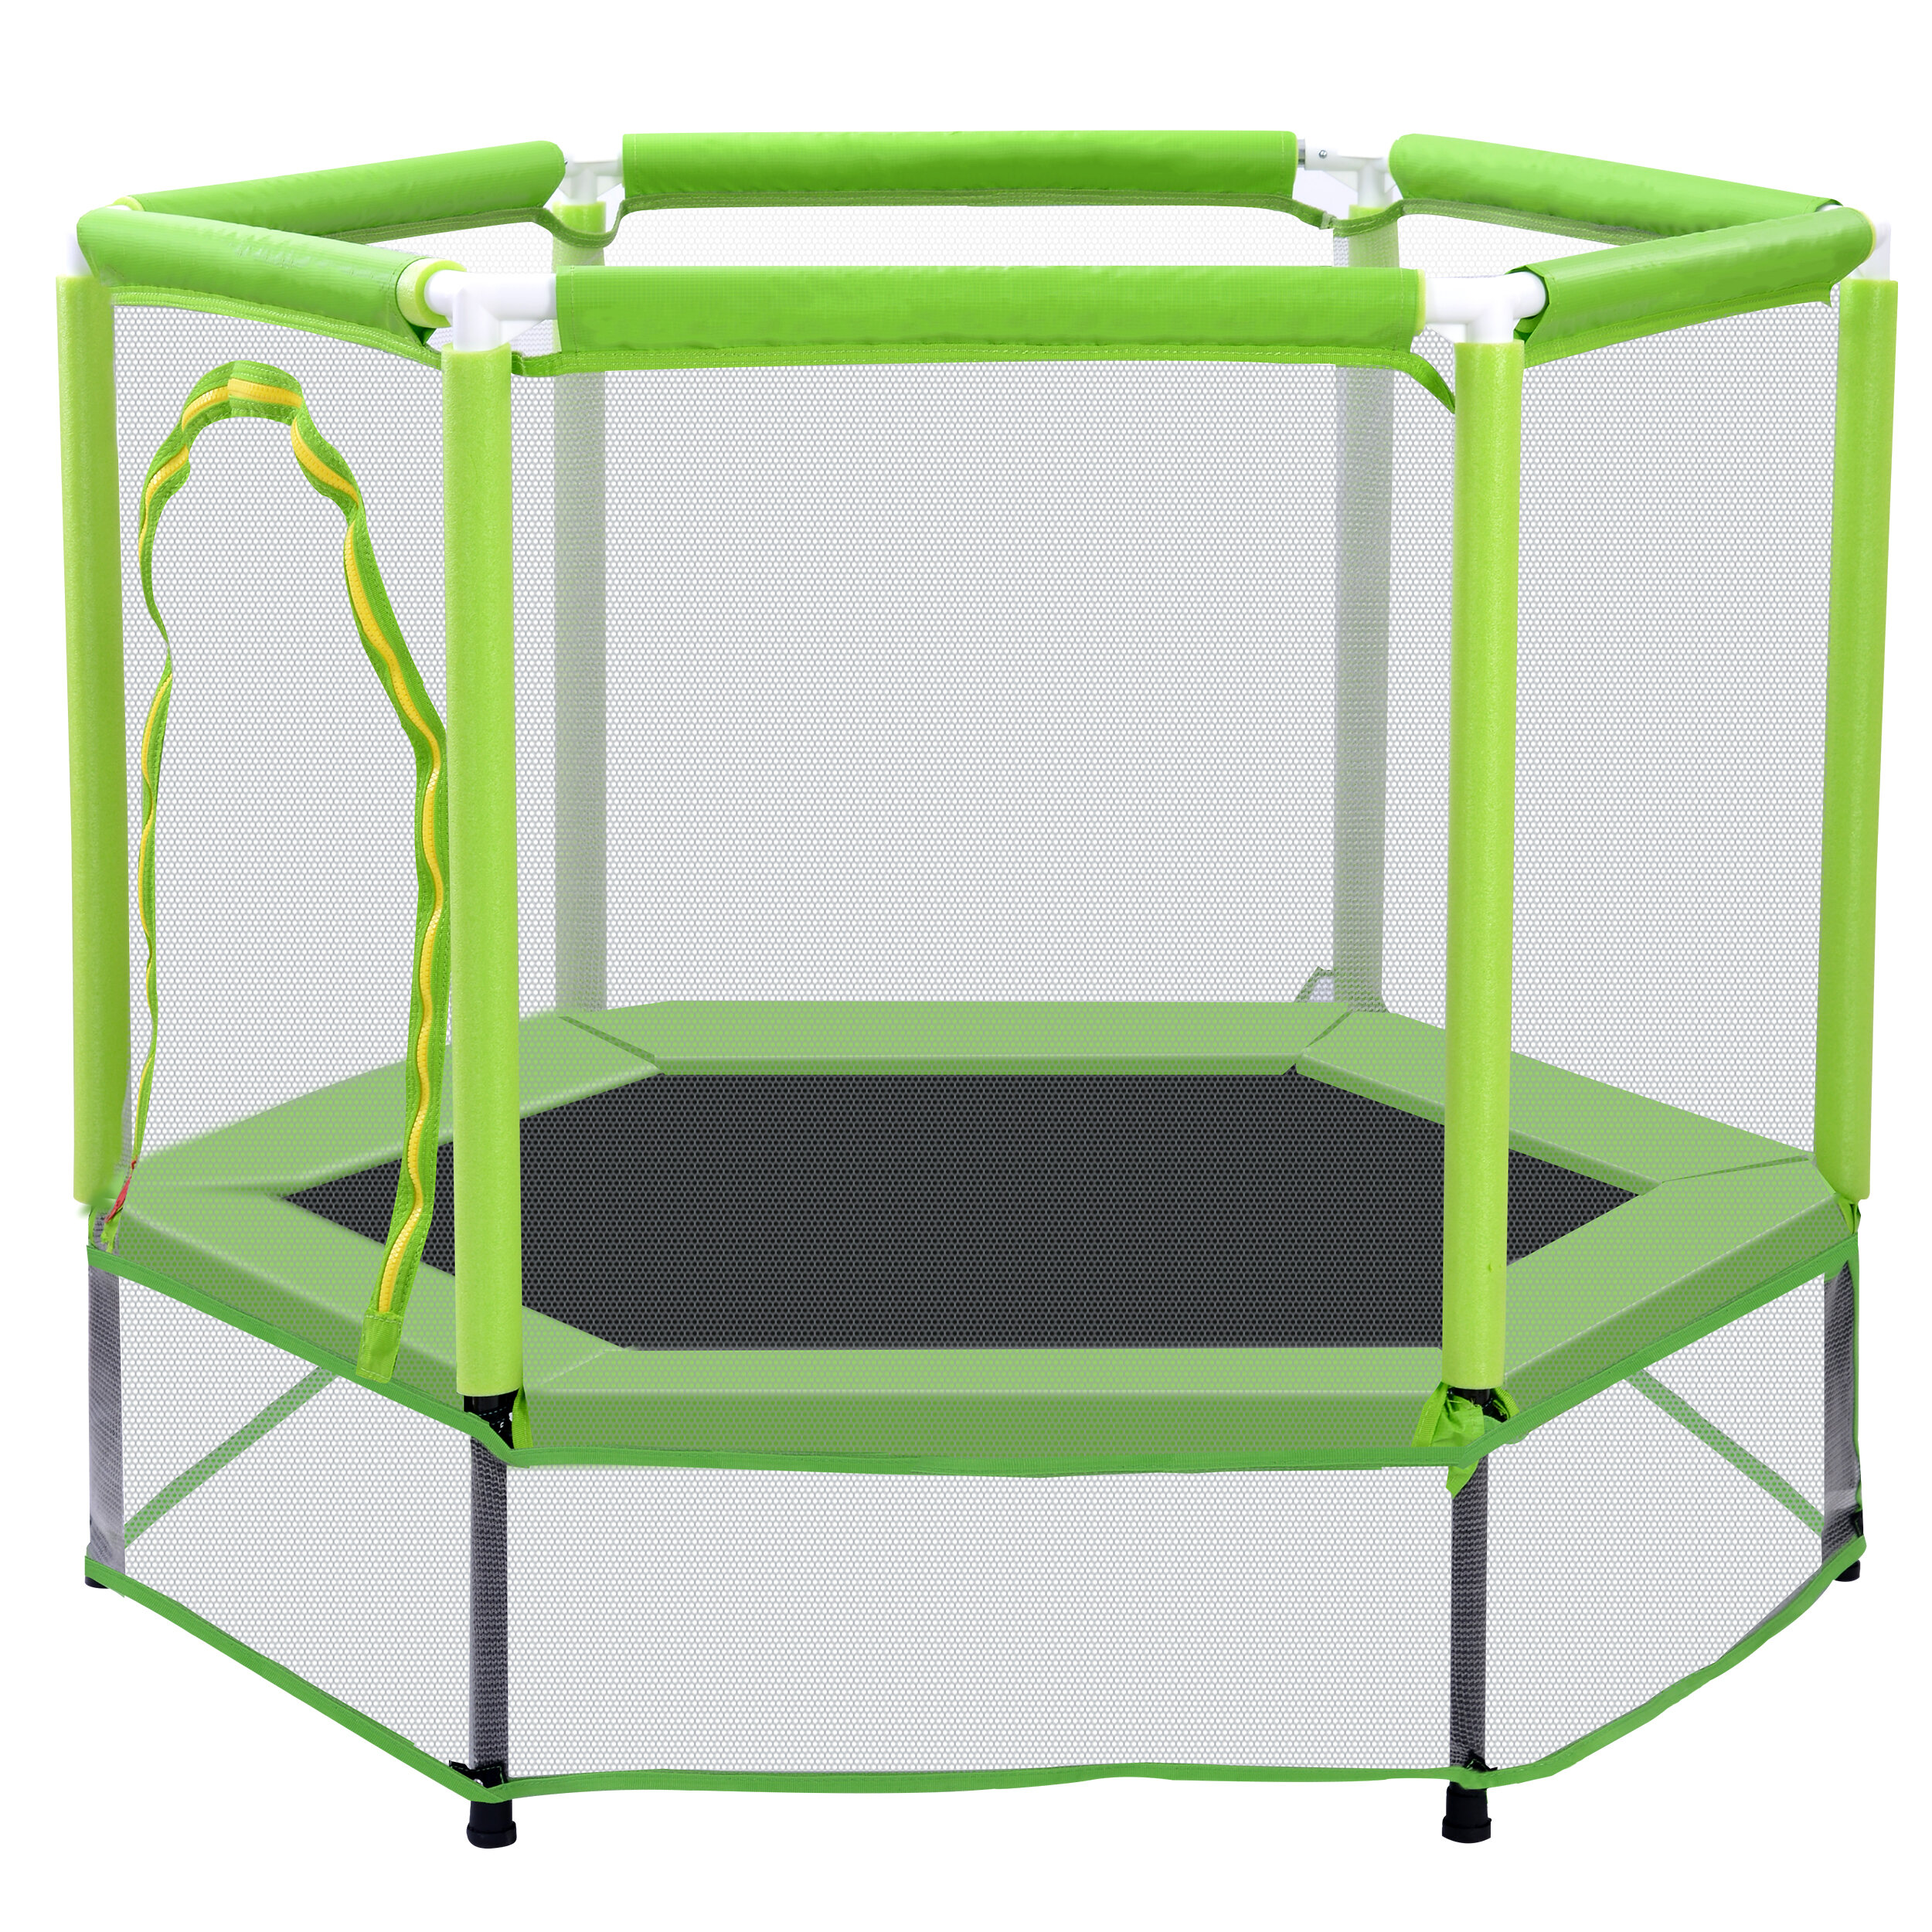 Sovid 55 Toddlers Trampoline With Safety Enclosure Net And Balls Indoor Outdoor Mini Trampoline For Kids Wayfair